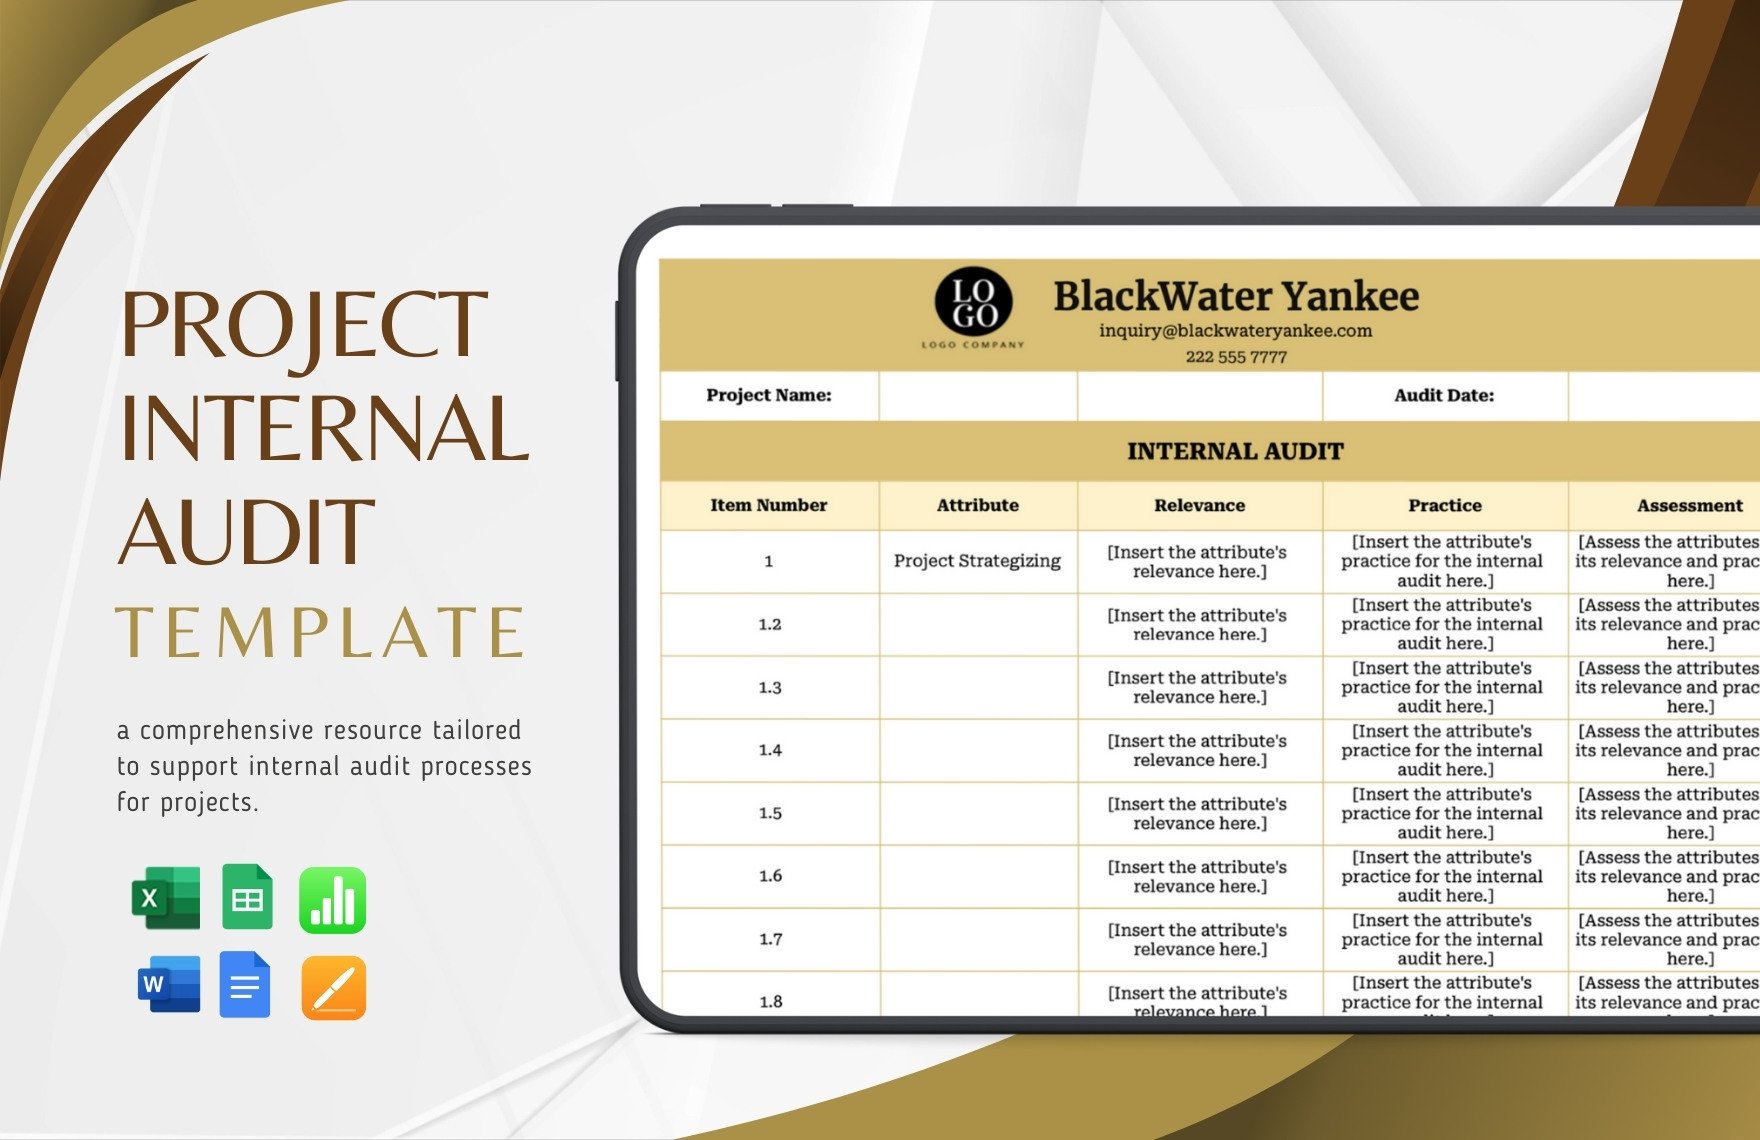 Project Internal Audit Template in Word, Google Docs, Excel, Google Sheets, Apple Pages, Apple Numbers